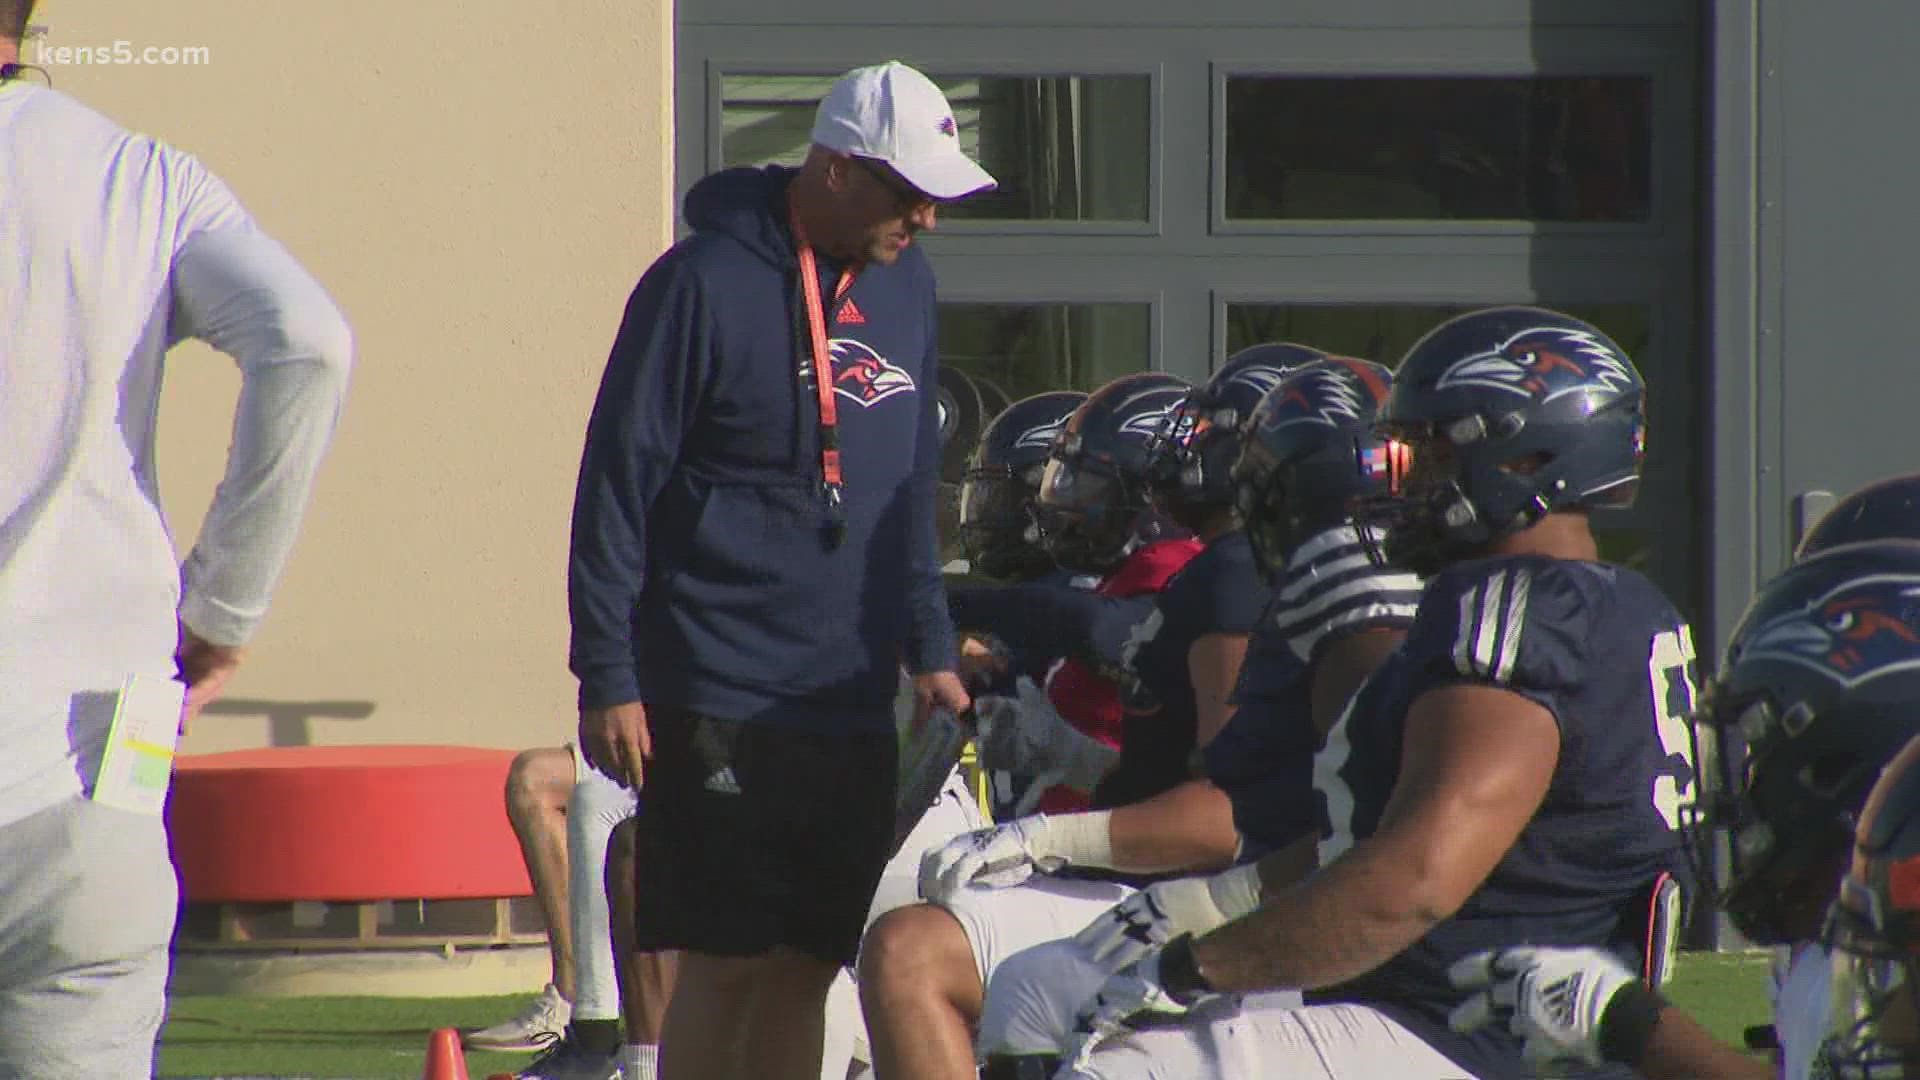 Thursday night is the culmination of spring workouts for the UTSA football team. Their annual spring game starts at 7pm.